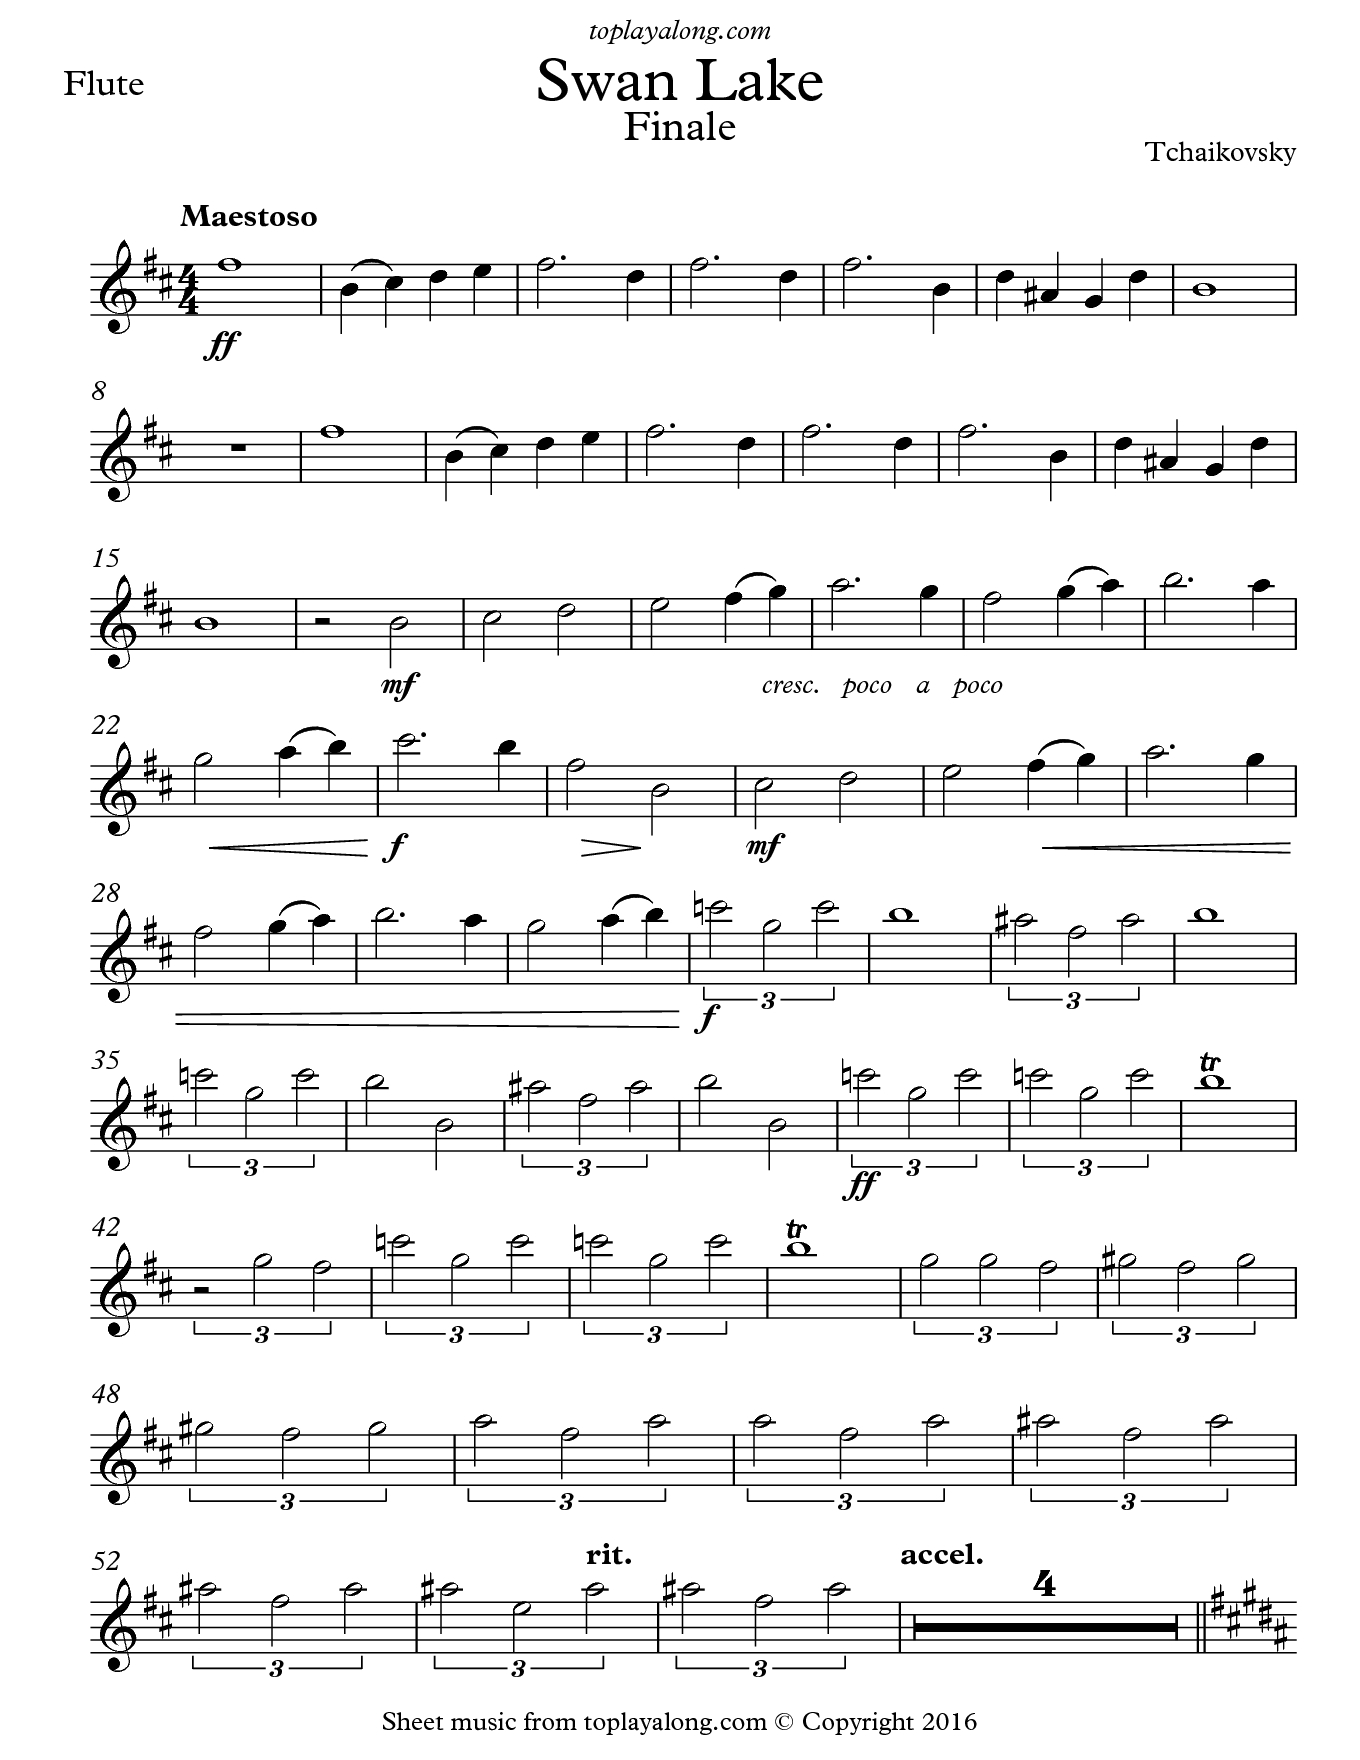 Free Flute Sheet Music For Swan Lake Finaletchaikovsky With - Free Printable Flute Music